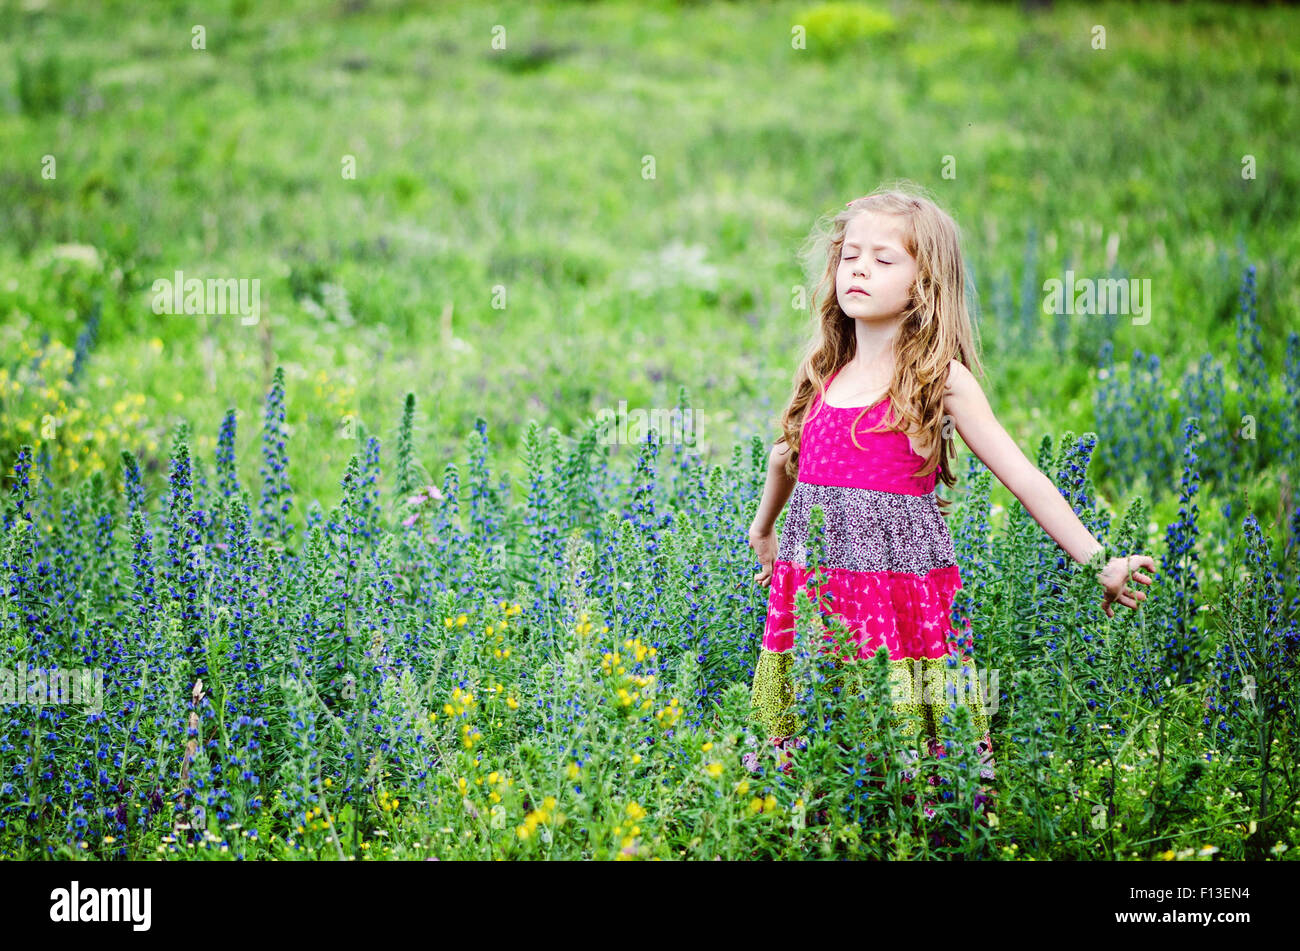 Girl standing in a field with outstretched arms Stock Photo